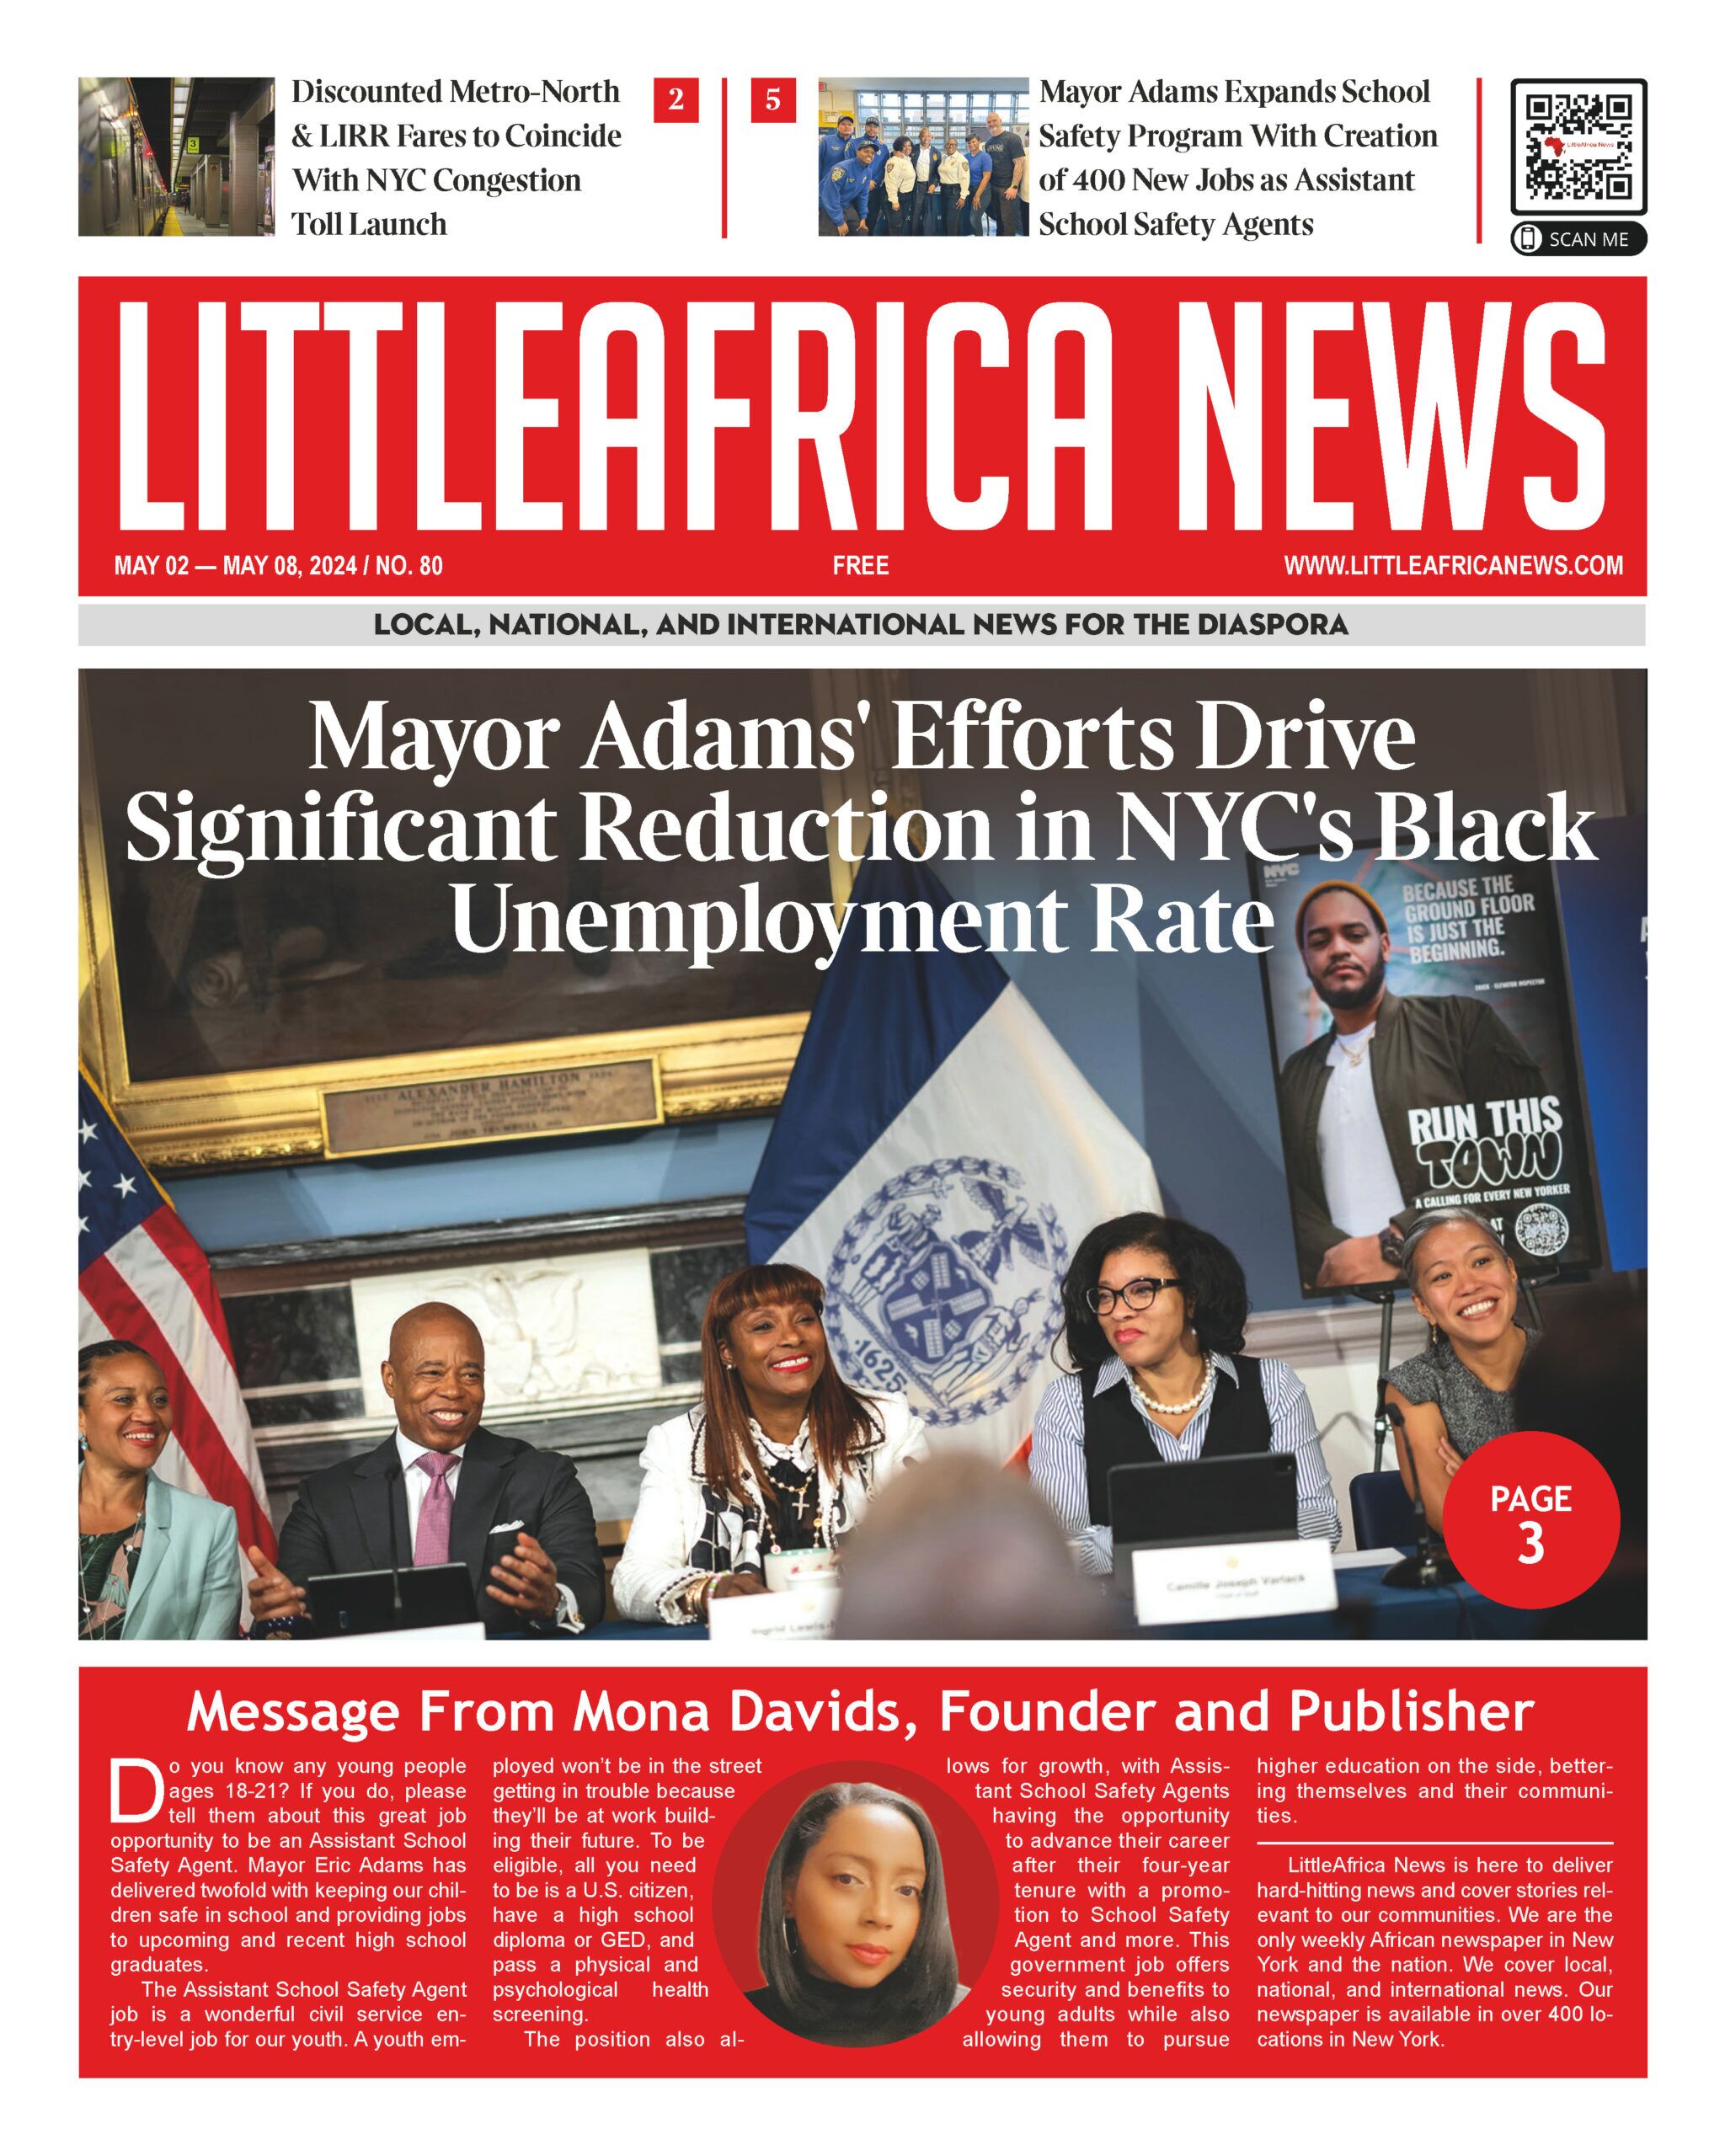 LittleAfrica News Newspaper: May 2-May 8, 2024